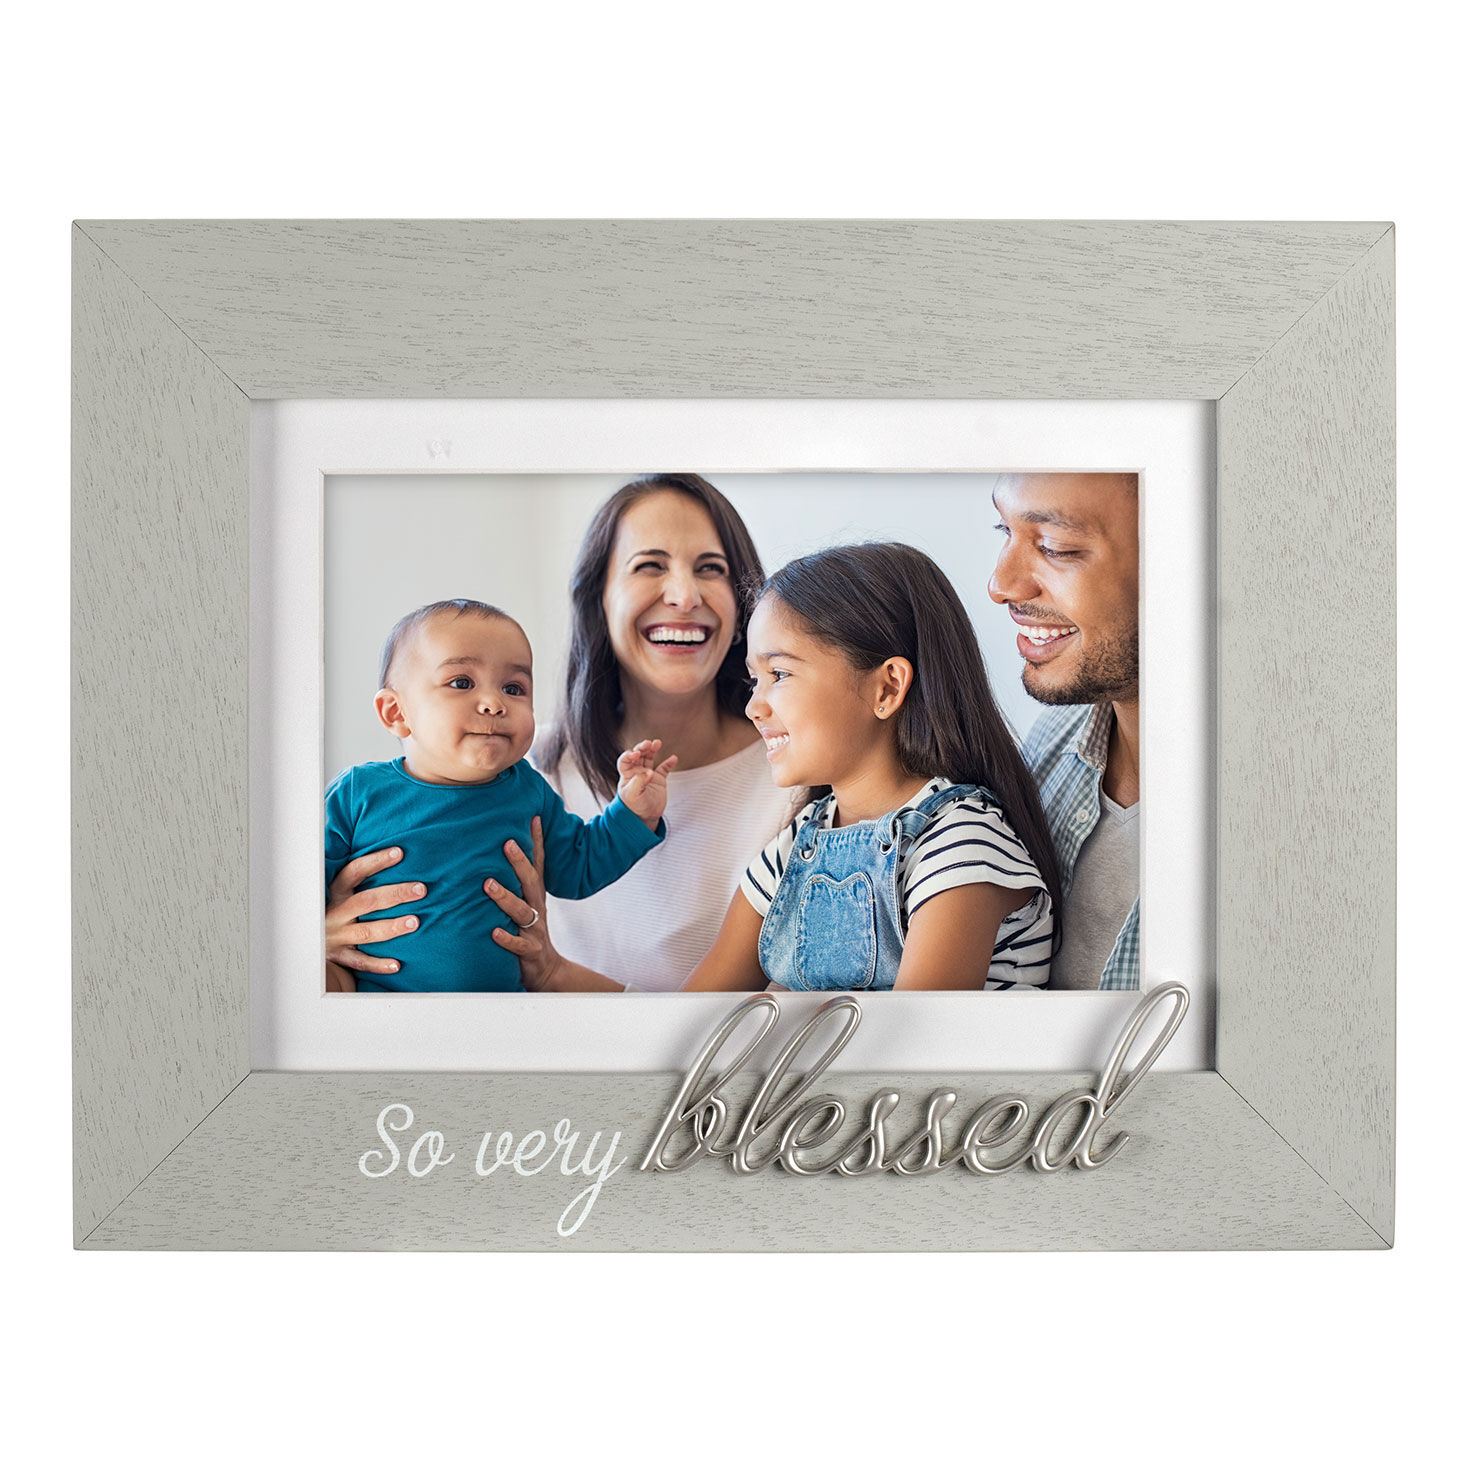 Malden All You Need is Love Picture Frame, 4x6 - Picture Frames - Hallmark